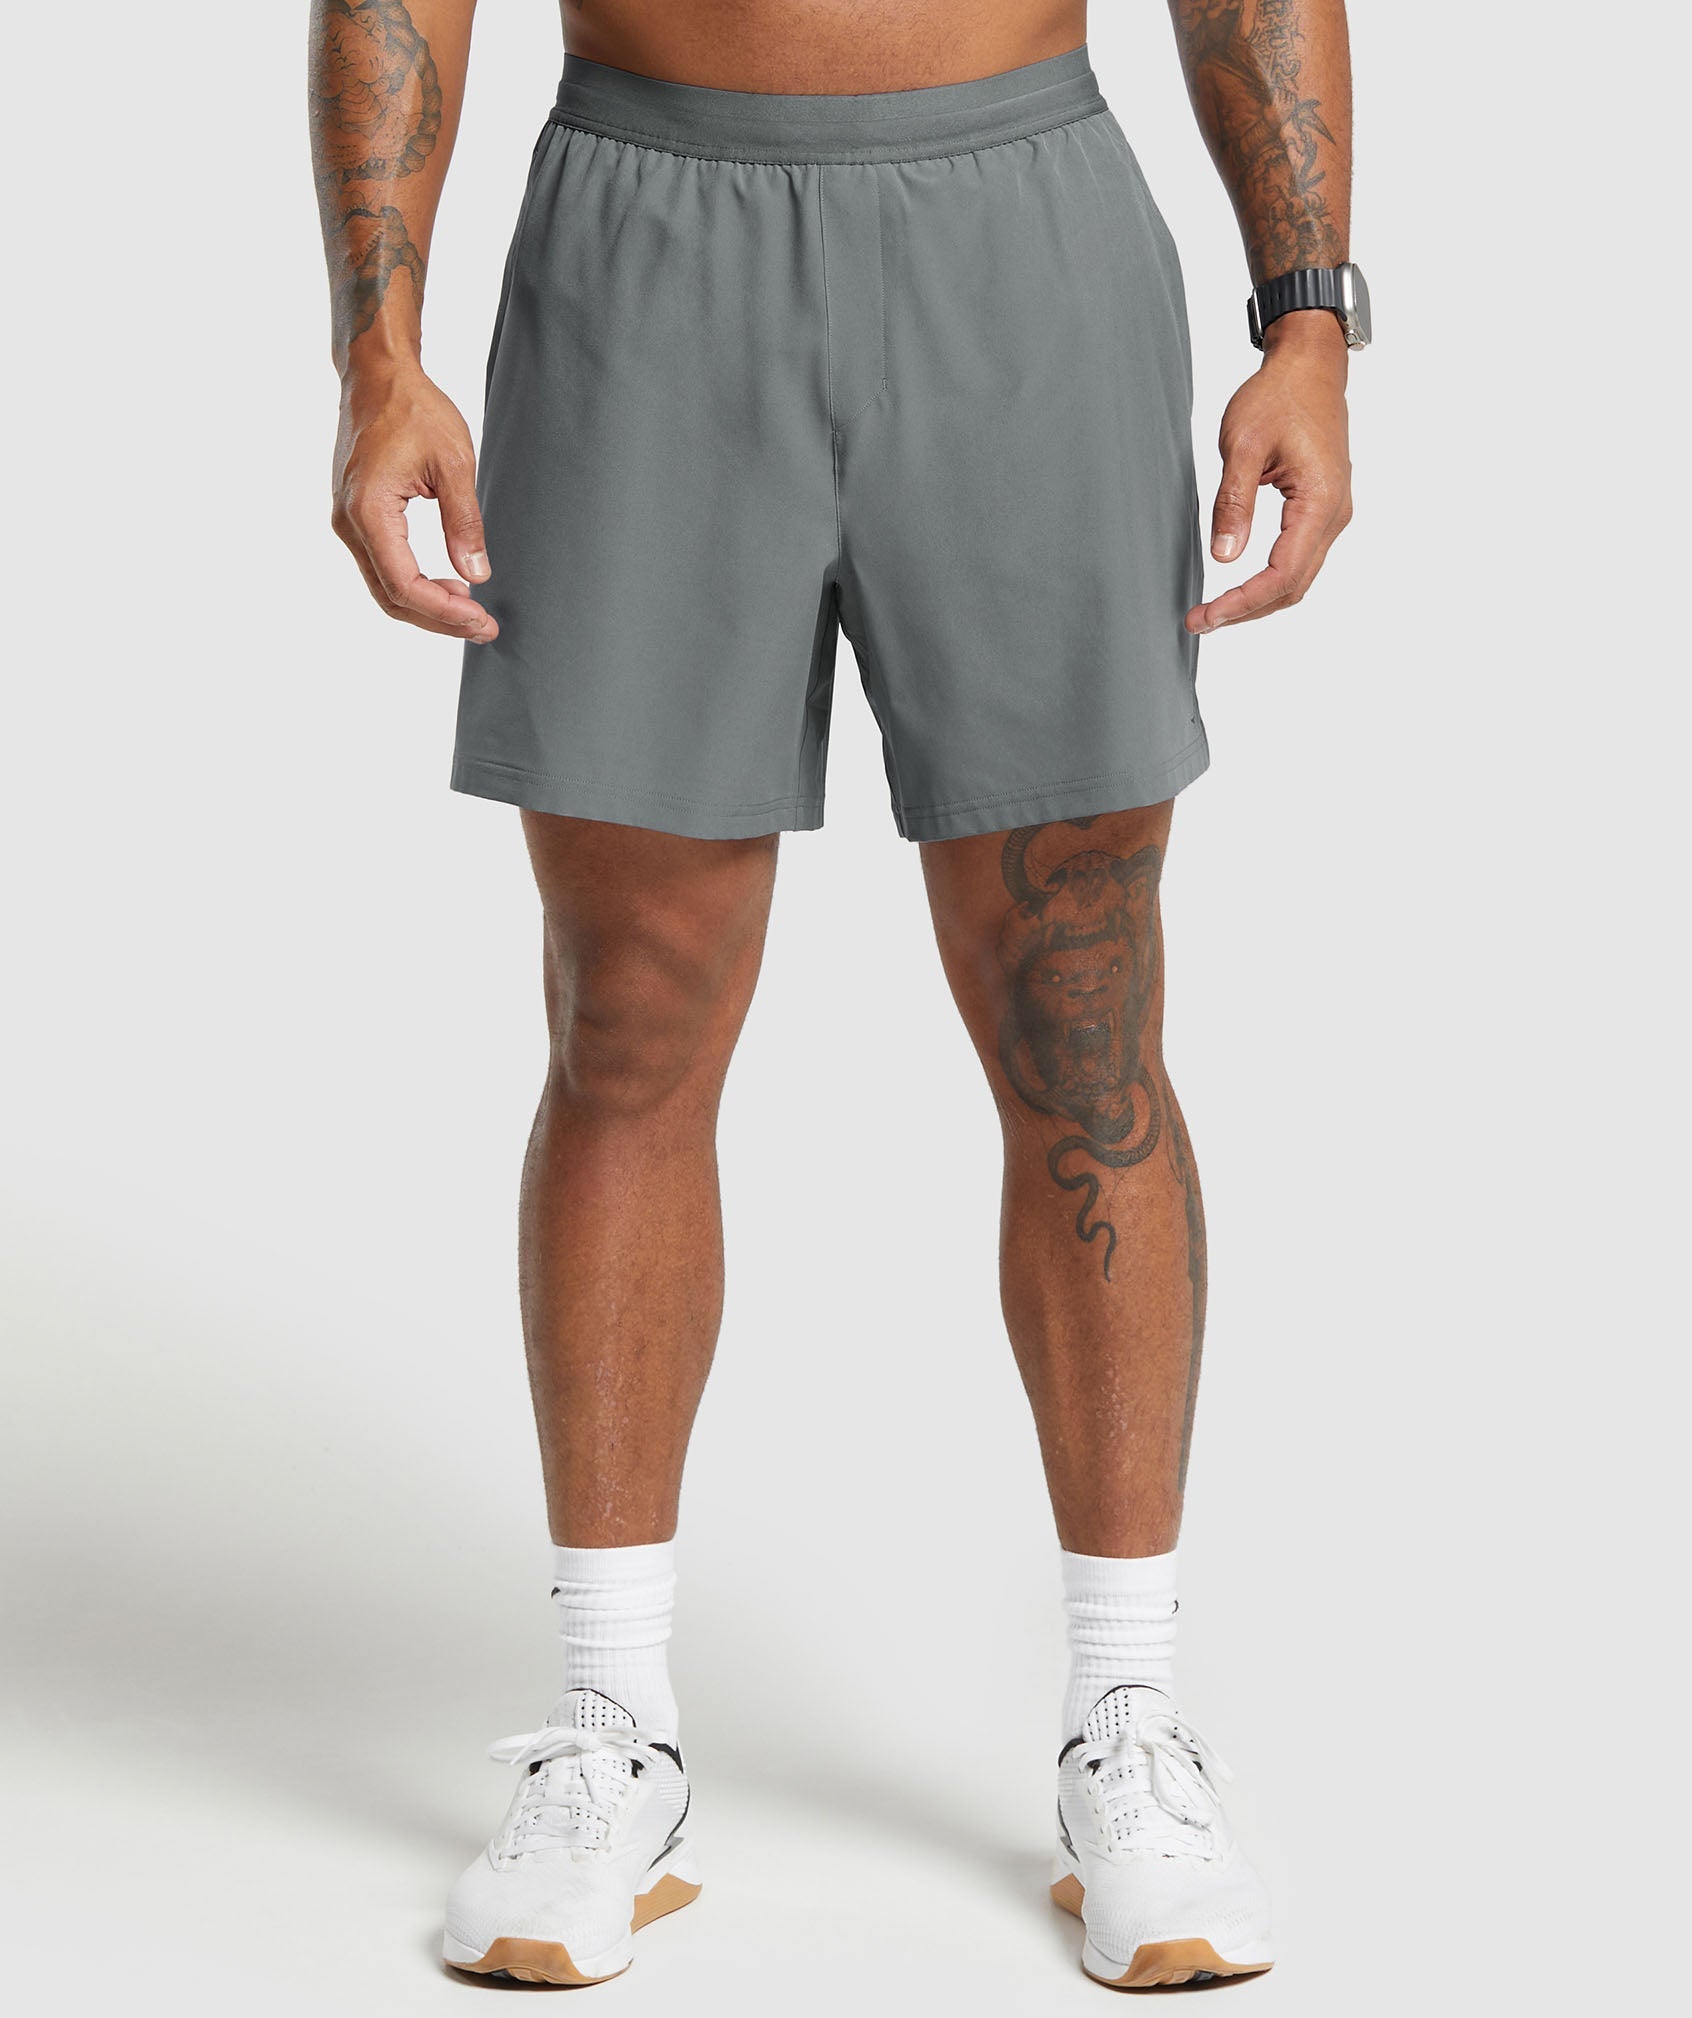 Land to Water 6" Shorts in Pitch Grey